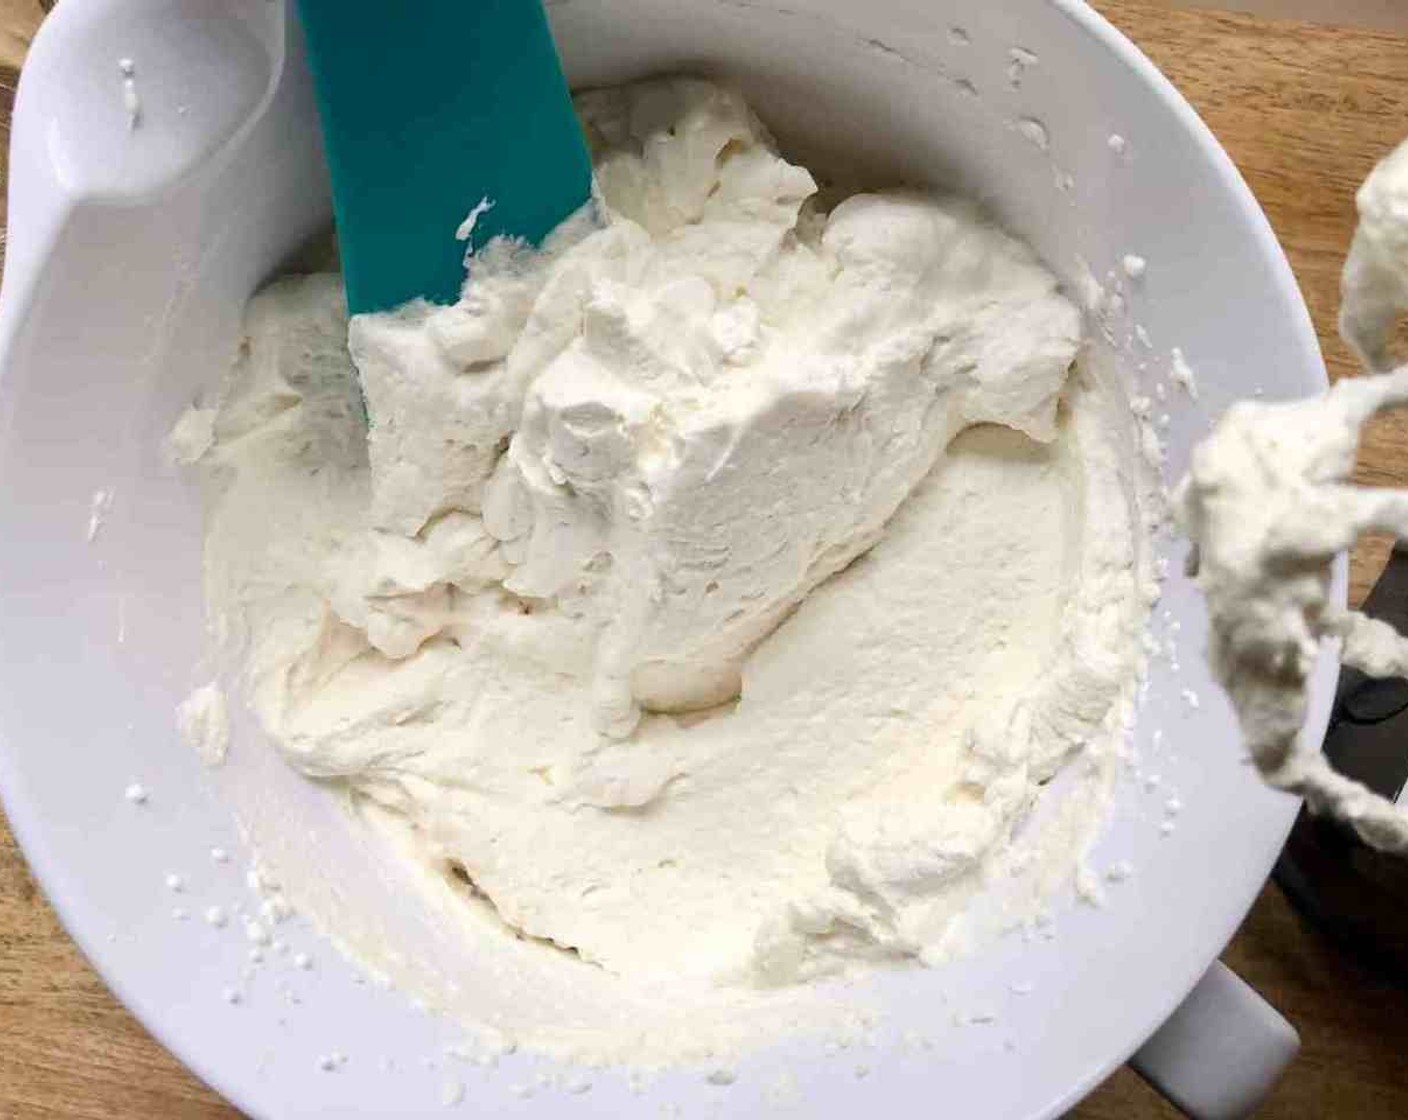 step 12 Meanwhile, prepare the whipped cream topping. Using a hand mixer or a stand mixer fitted with a whisk attachment, whip the Whipped Cream (2 cups), Granulated Sugar (1/4 cup), and Pure Vanilla Extract (1 tsp) on medium-high speed until medium peaks form, about 3-4 minutes.